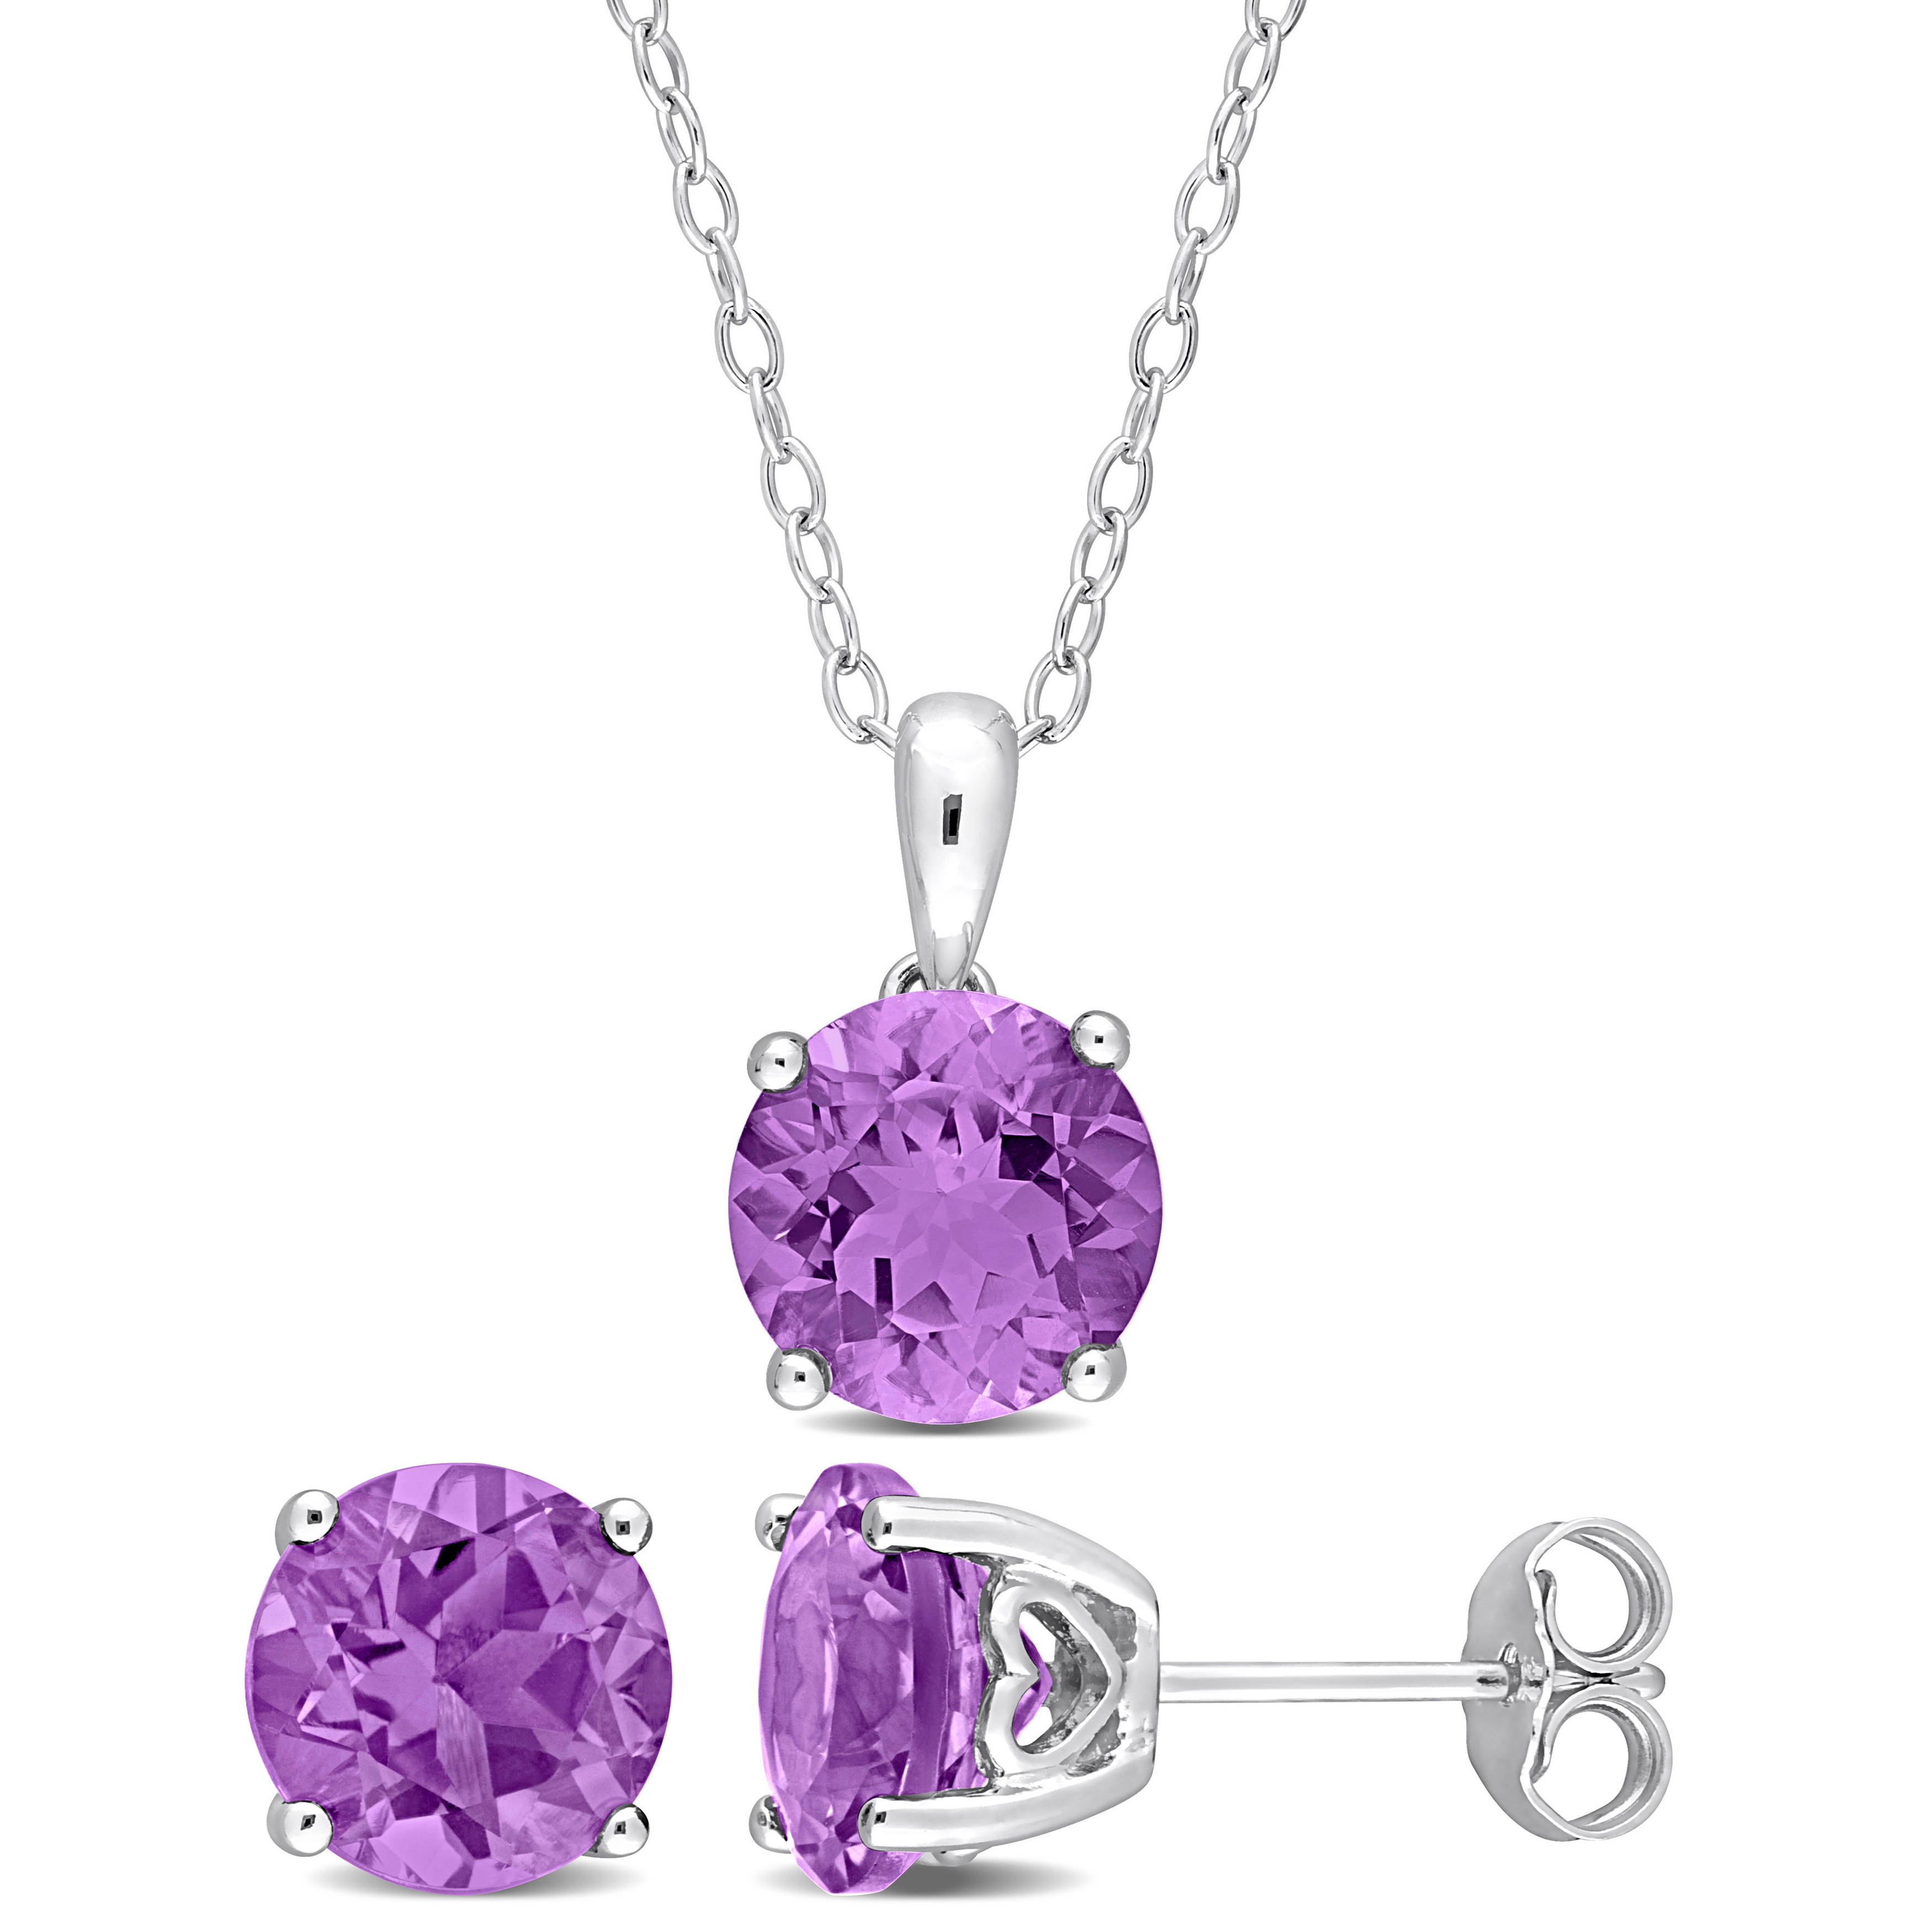 4 1/2 CT TGW Amethyst 2-Piece Set of Pendant with Chain and Earrings in Sterling Silver